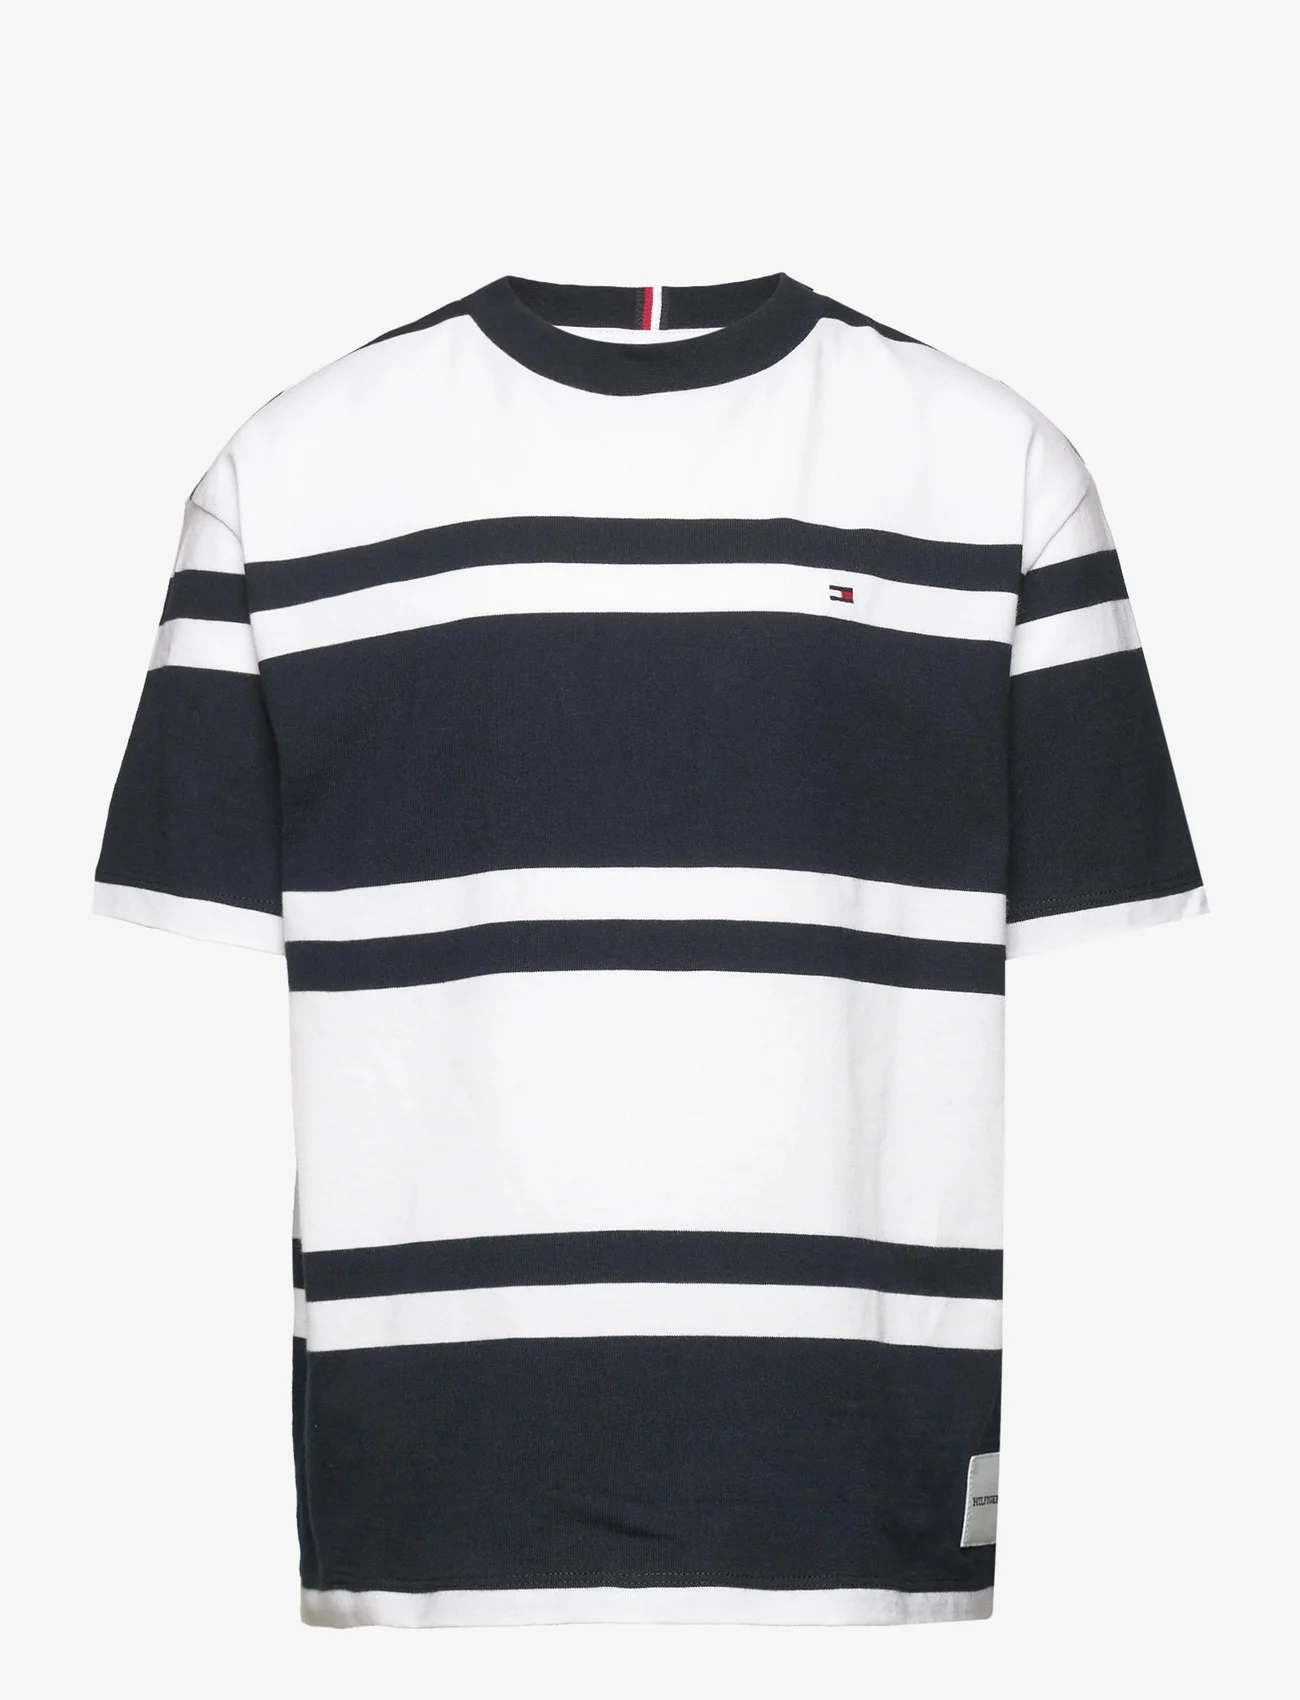 Tommy Hilfiger - RUGBY STRIPE TEE S/S - lyhythihaiset t-paidat - white base/blue stripes - 0